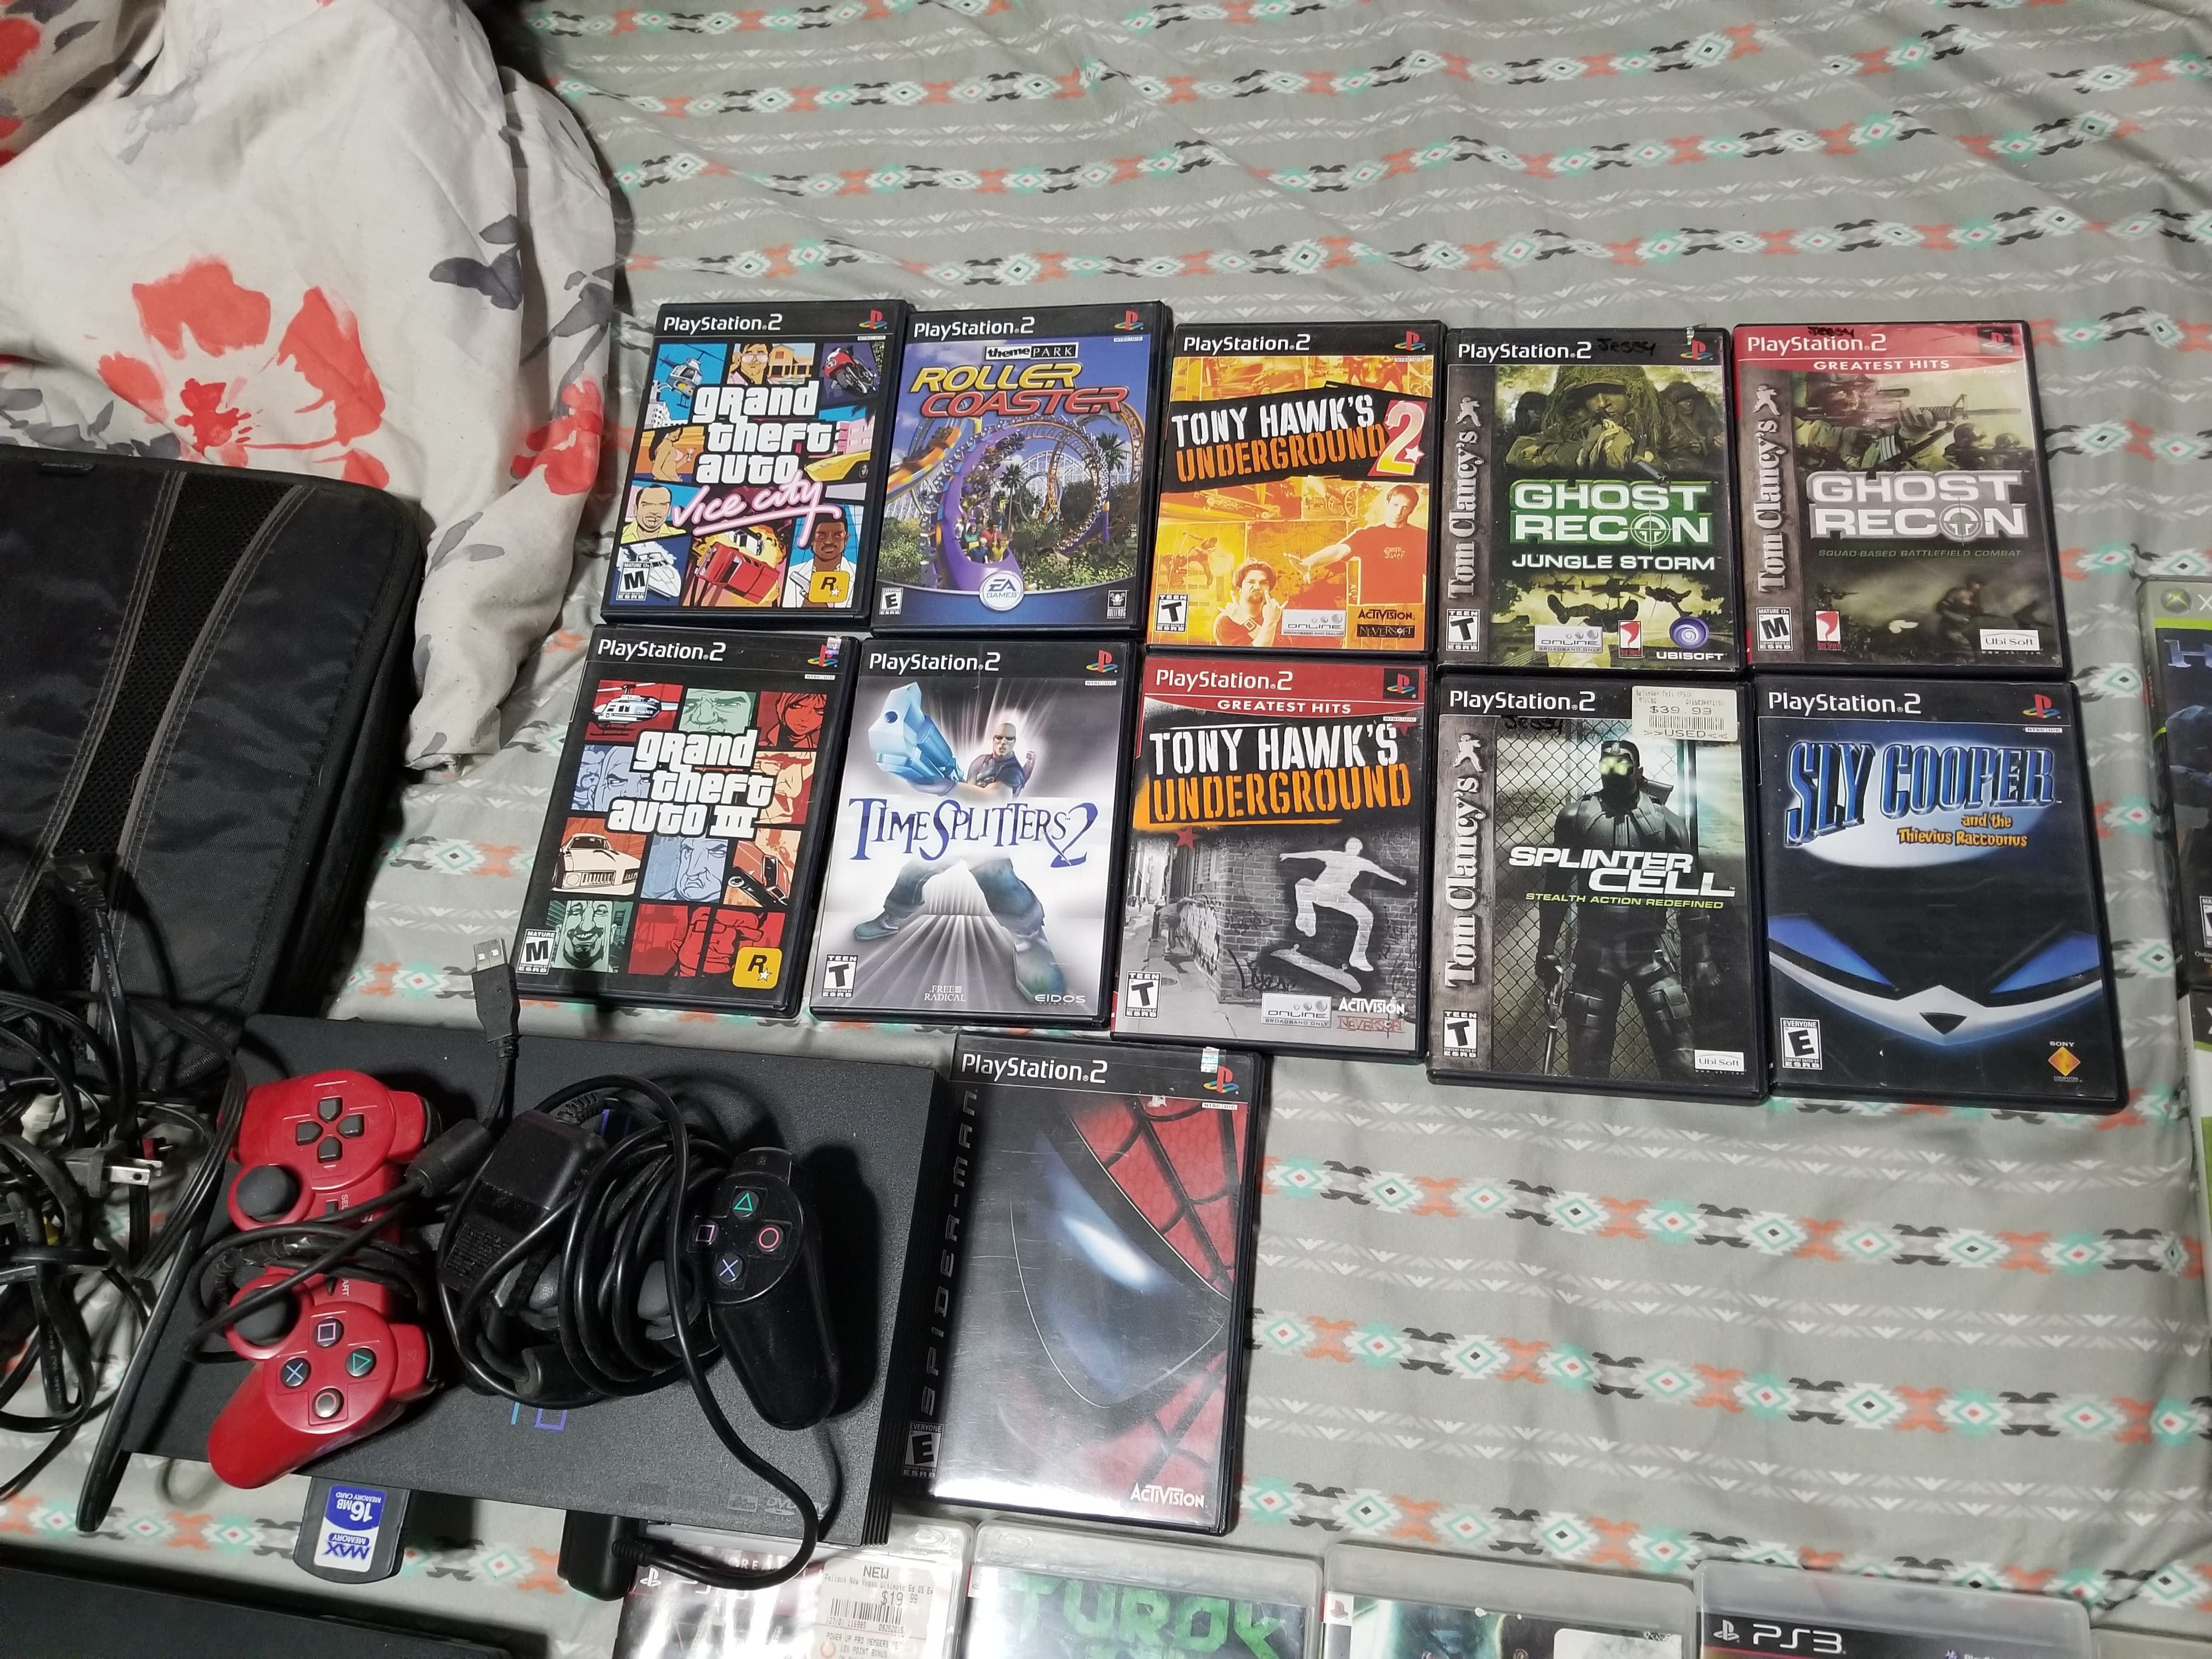 Far Cry 2 Ps3 for Sale in San Juan, TX - OfferUp